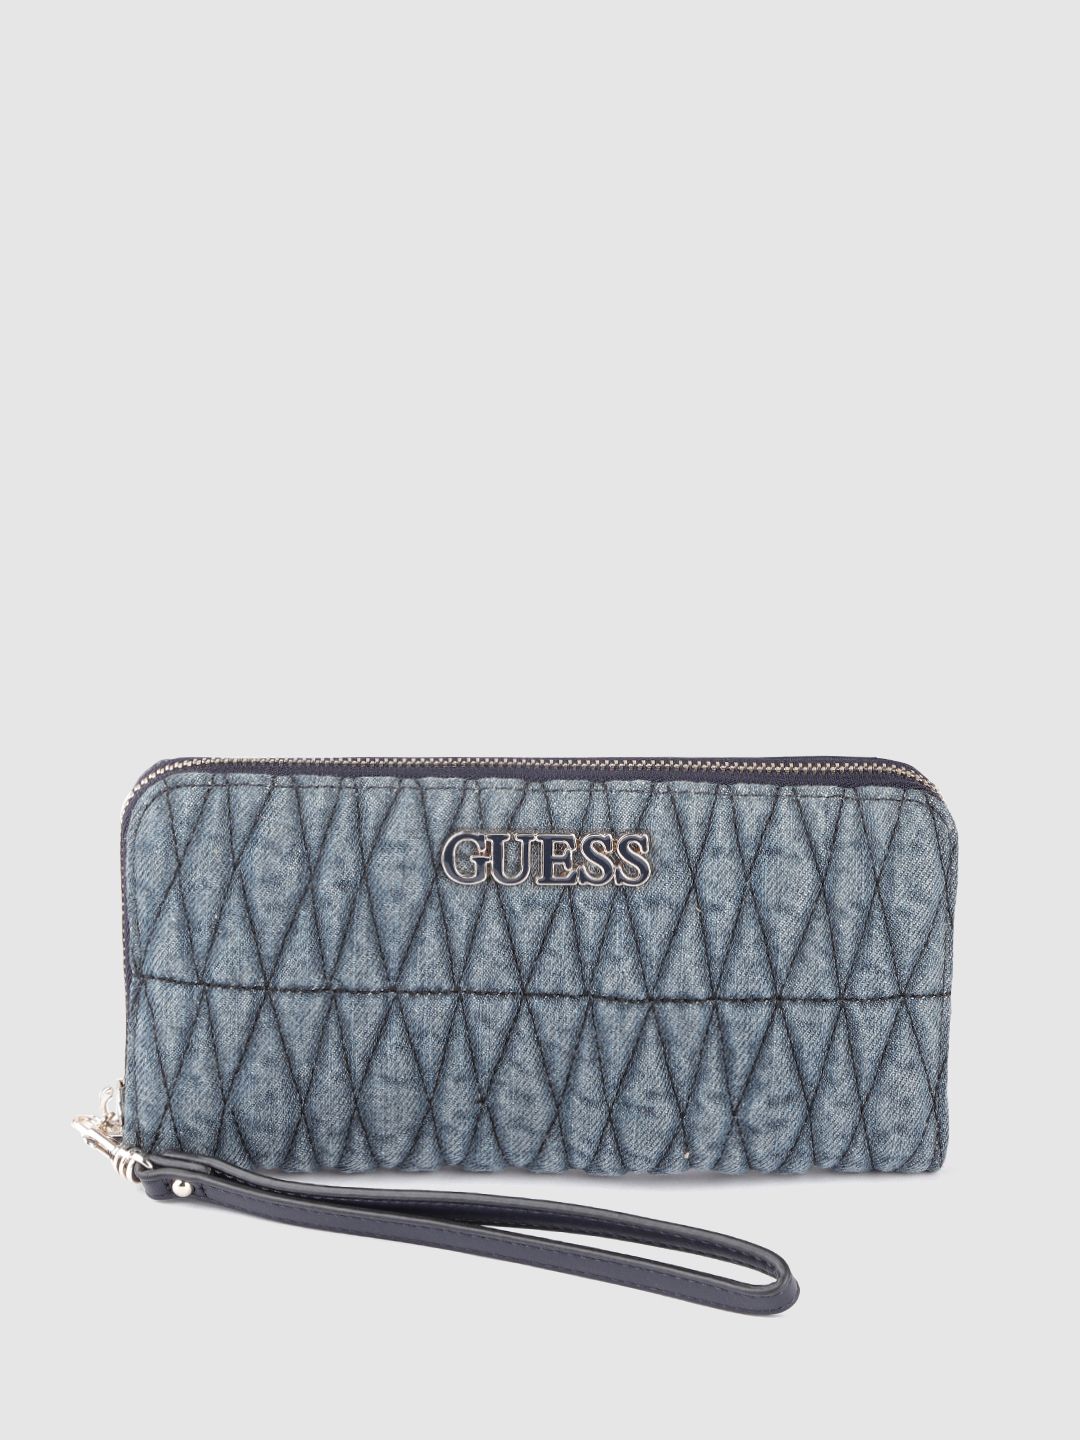 GUESS Women Blue Quilted Zip Around Wallet Price in India